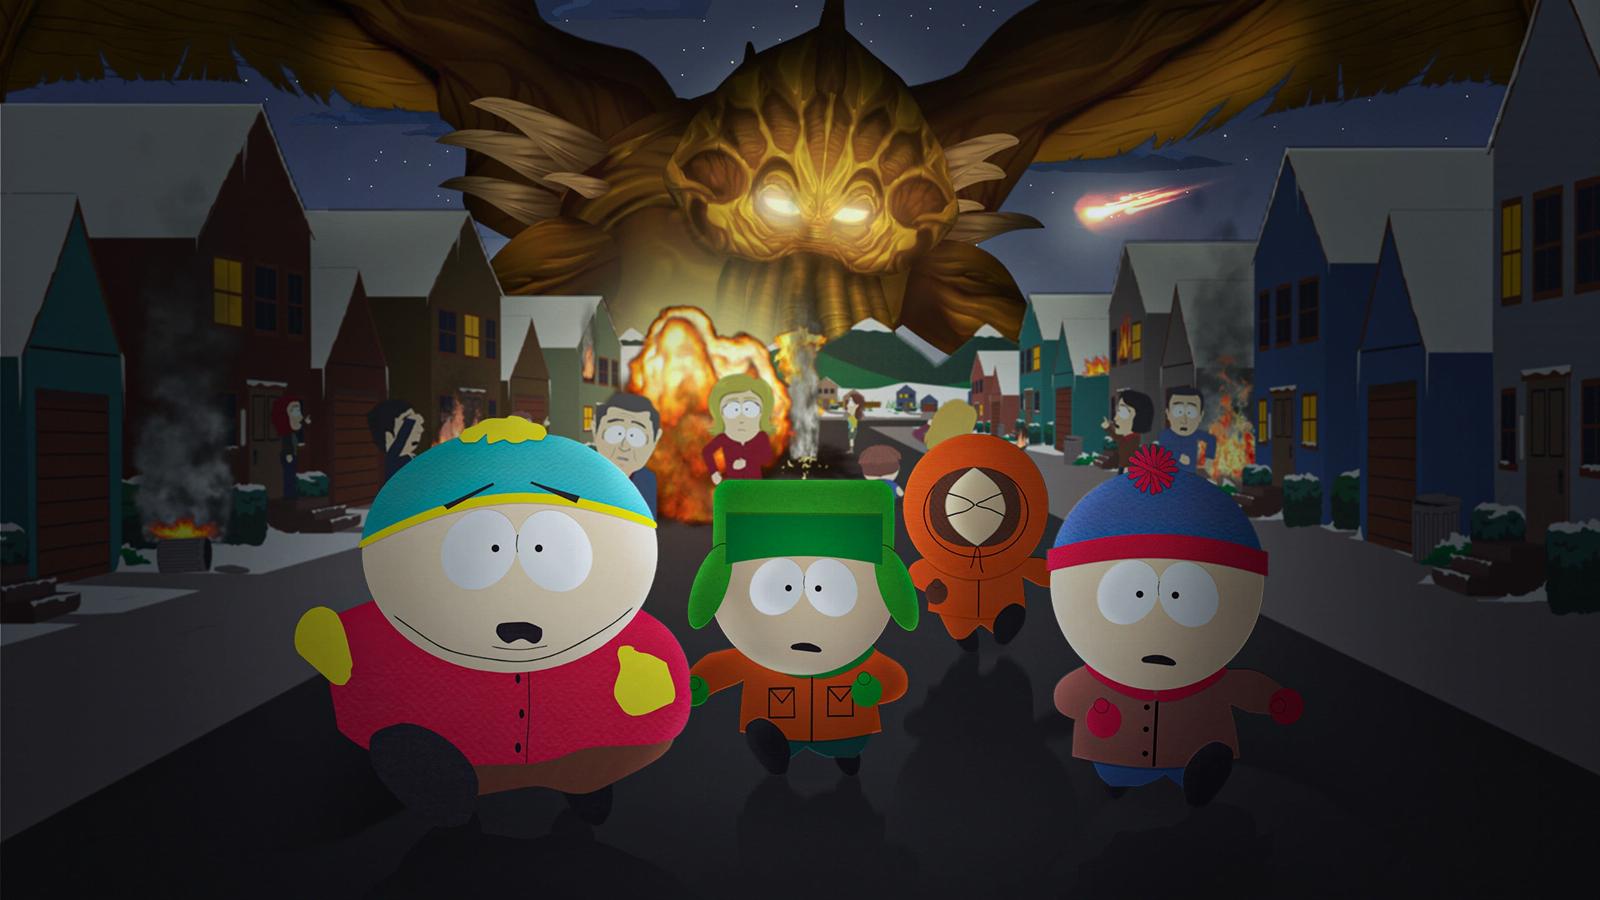 Paramount alleges Warner Bros. Discovery owes $52M for ‘South Park’ streaming rights